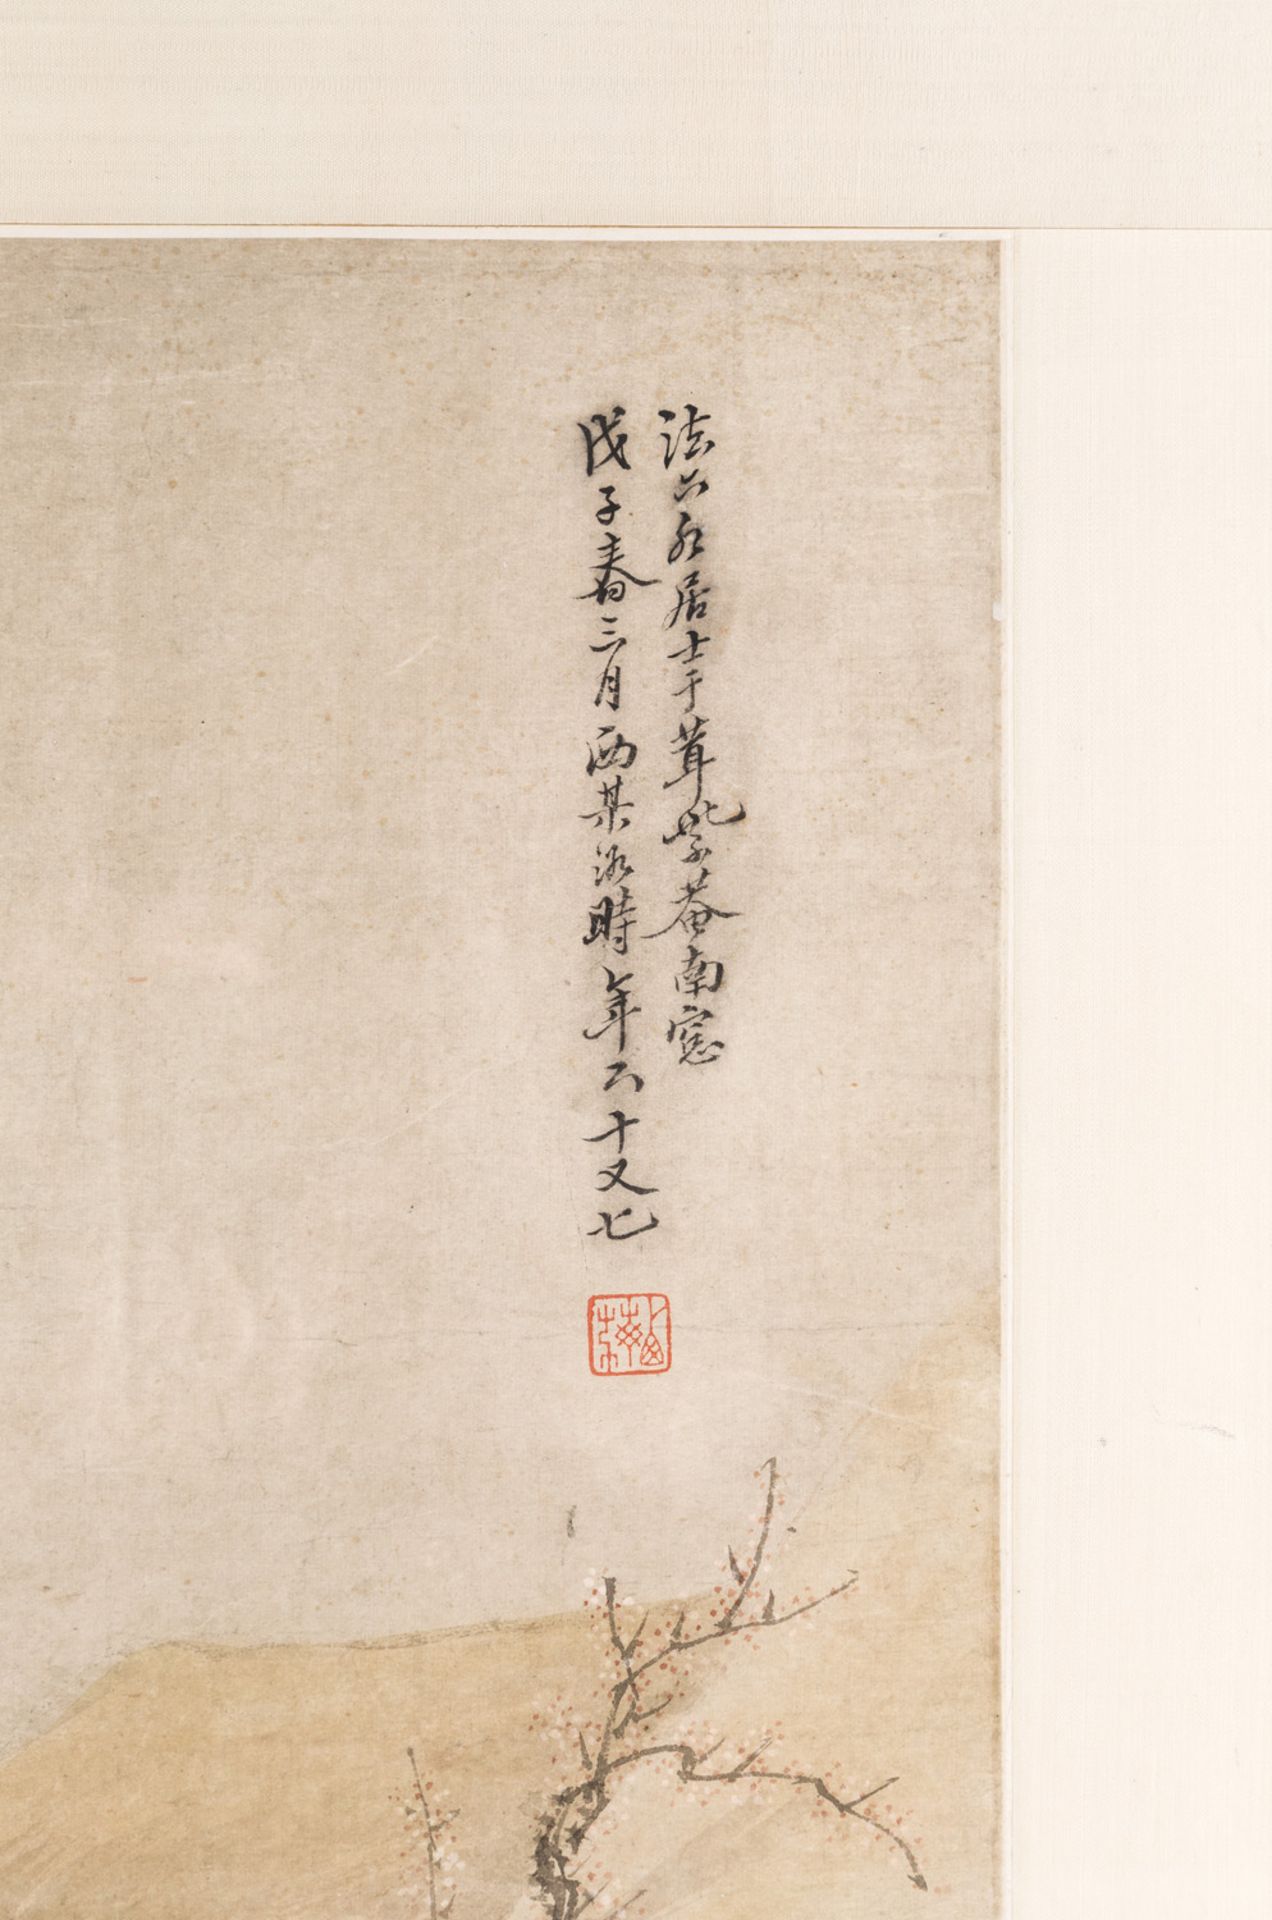 GU LUO (CHINESE 1763-1837) - Image 3 of 4